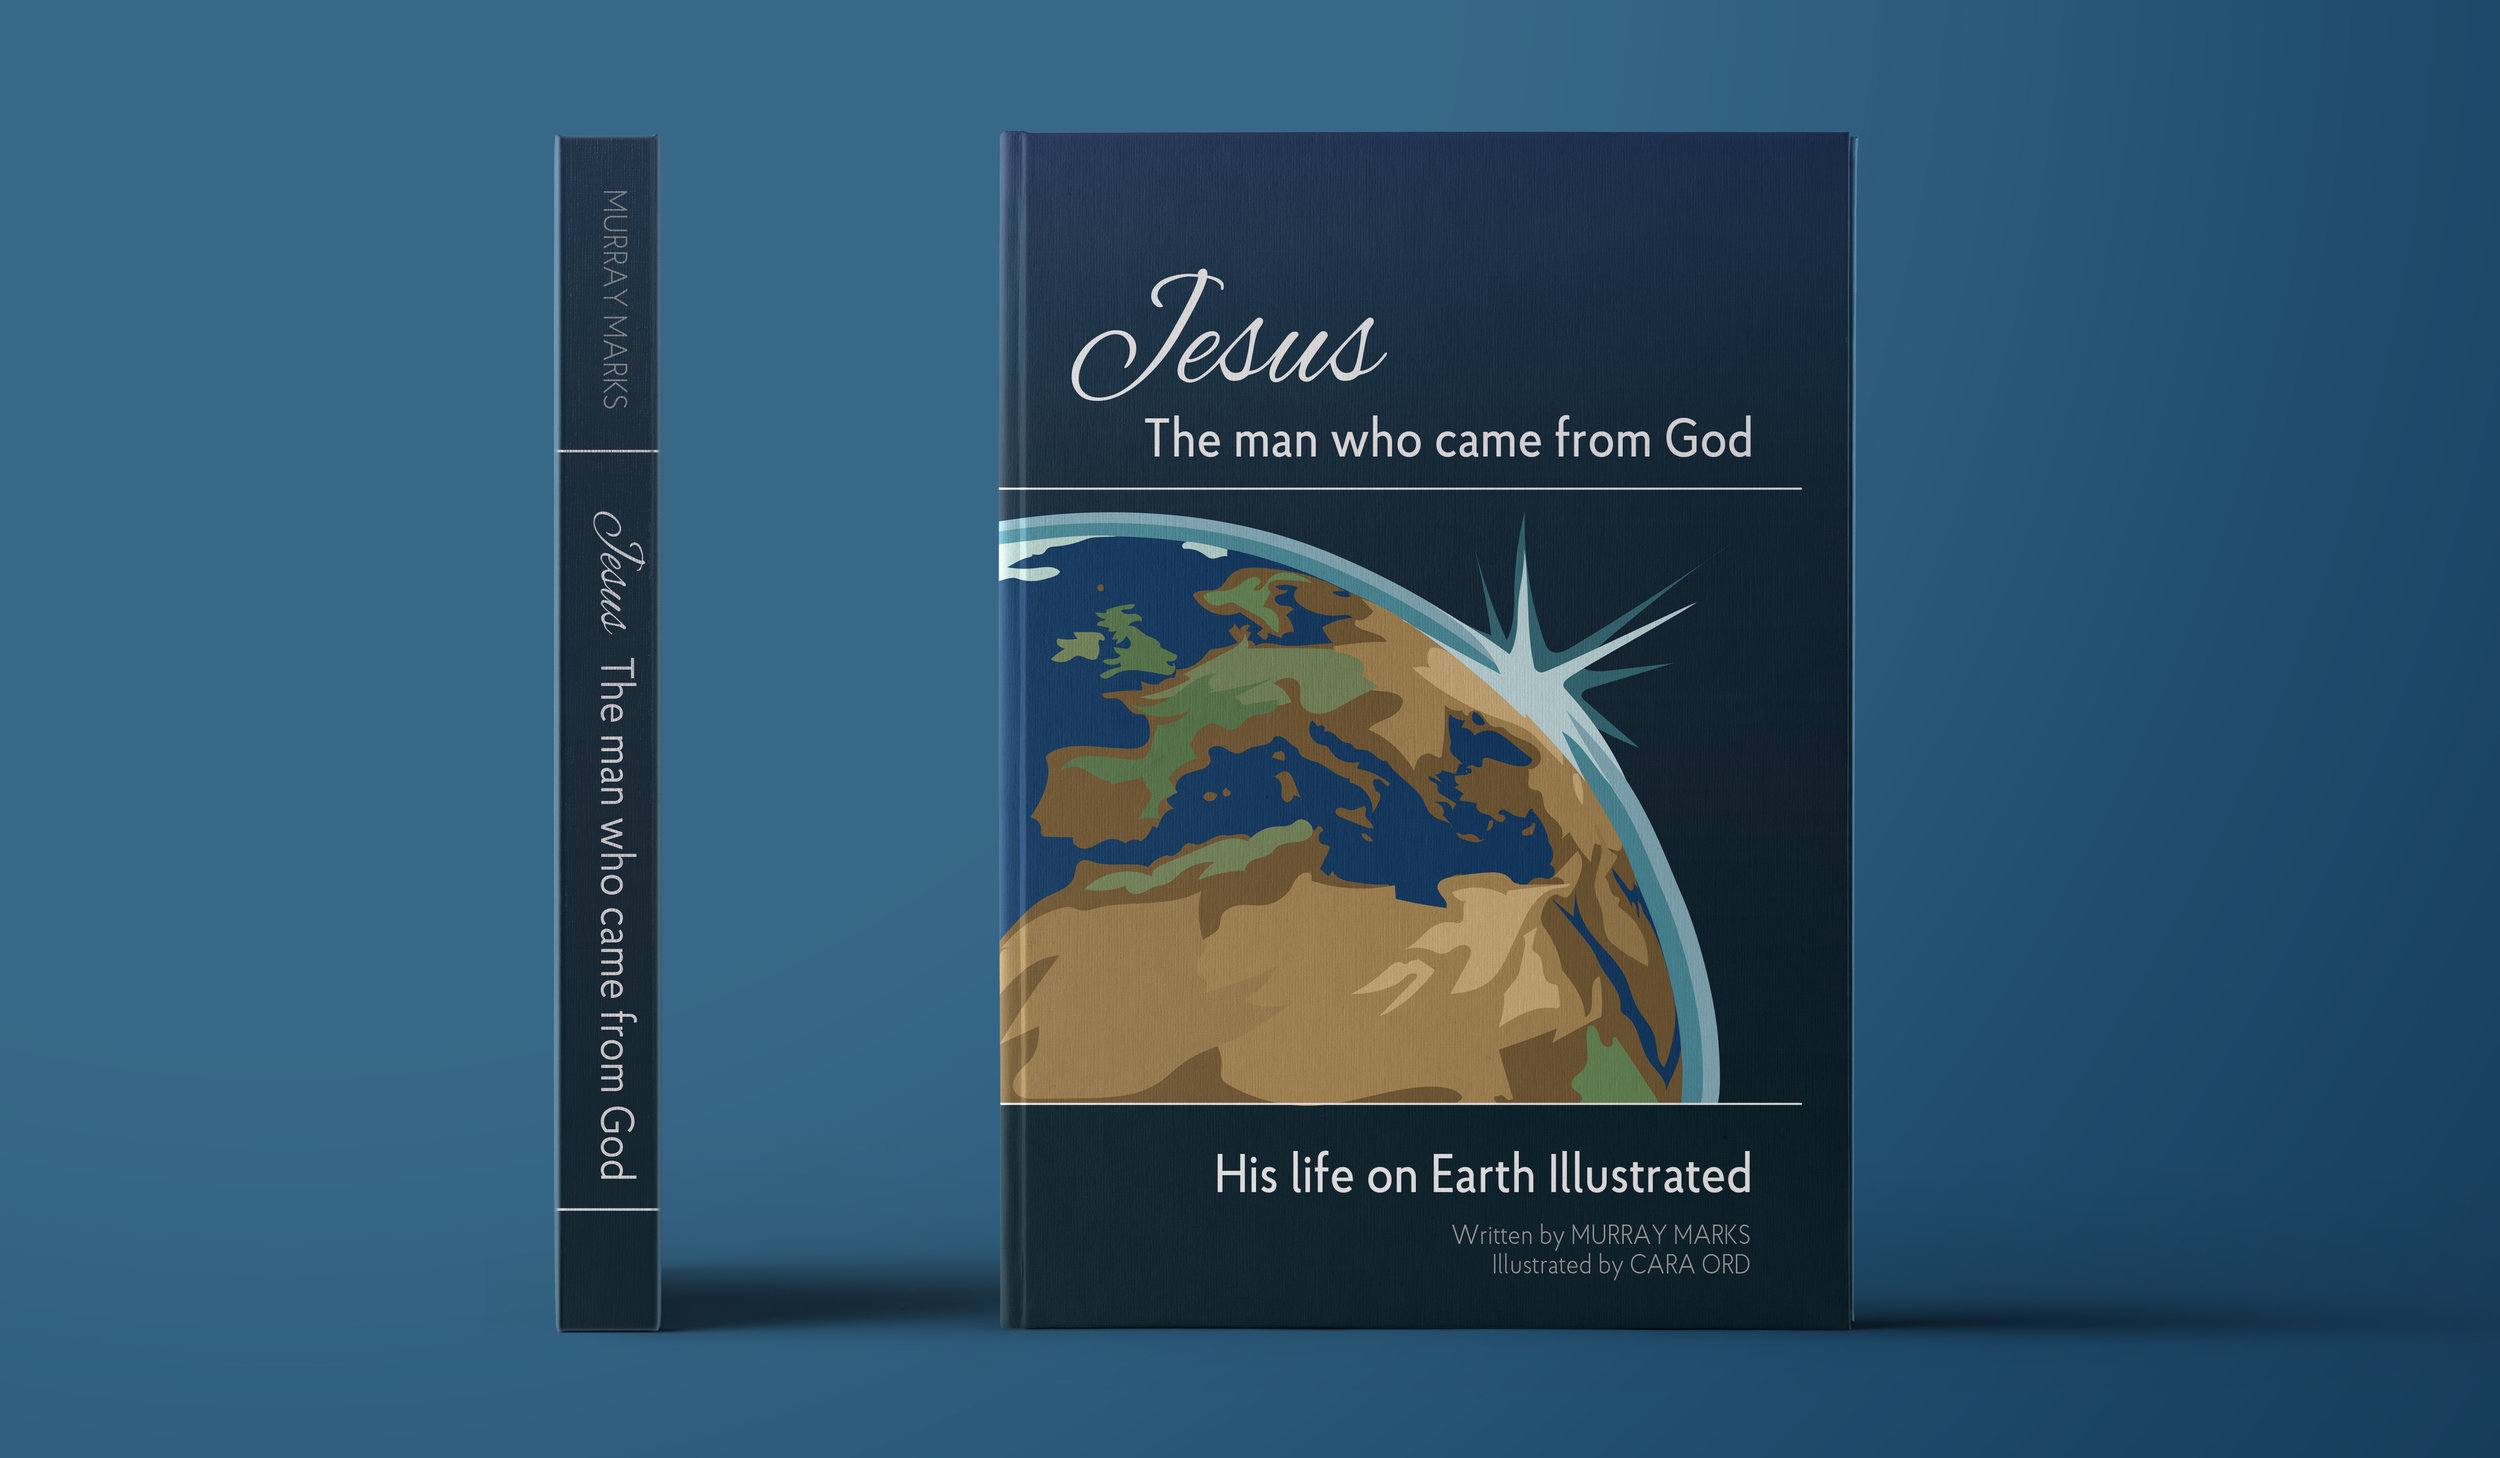 Book cover design – Jesus the man who came from God